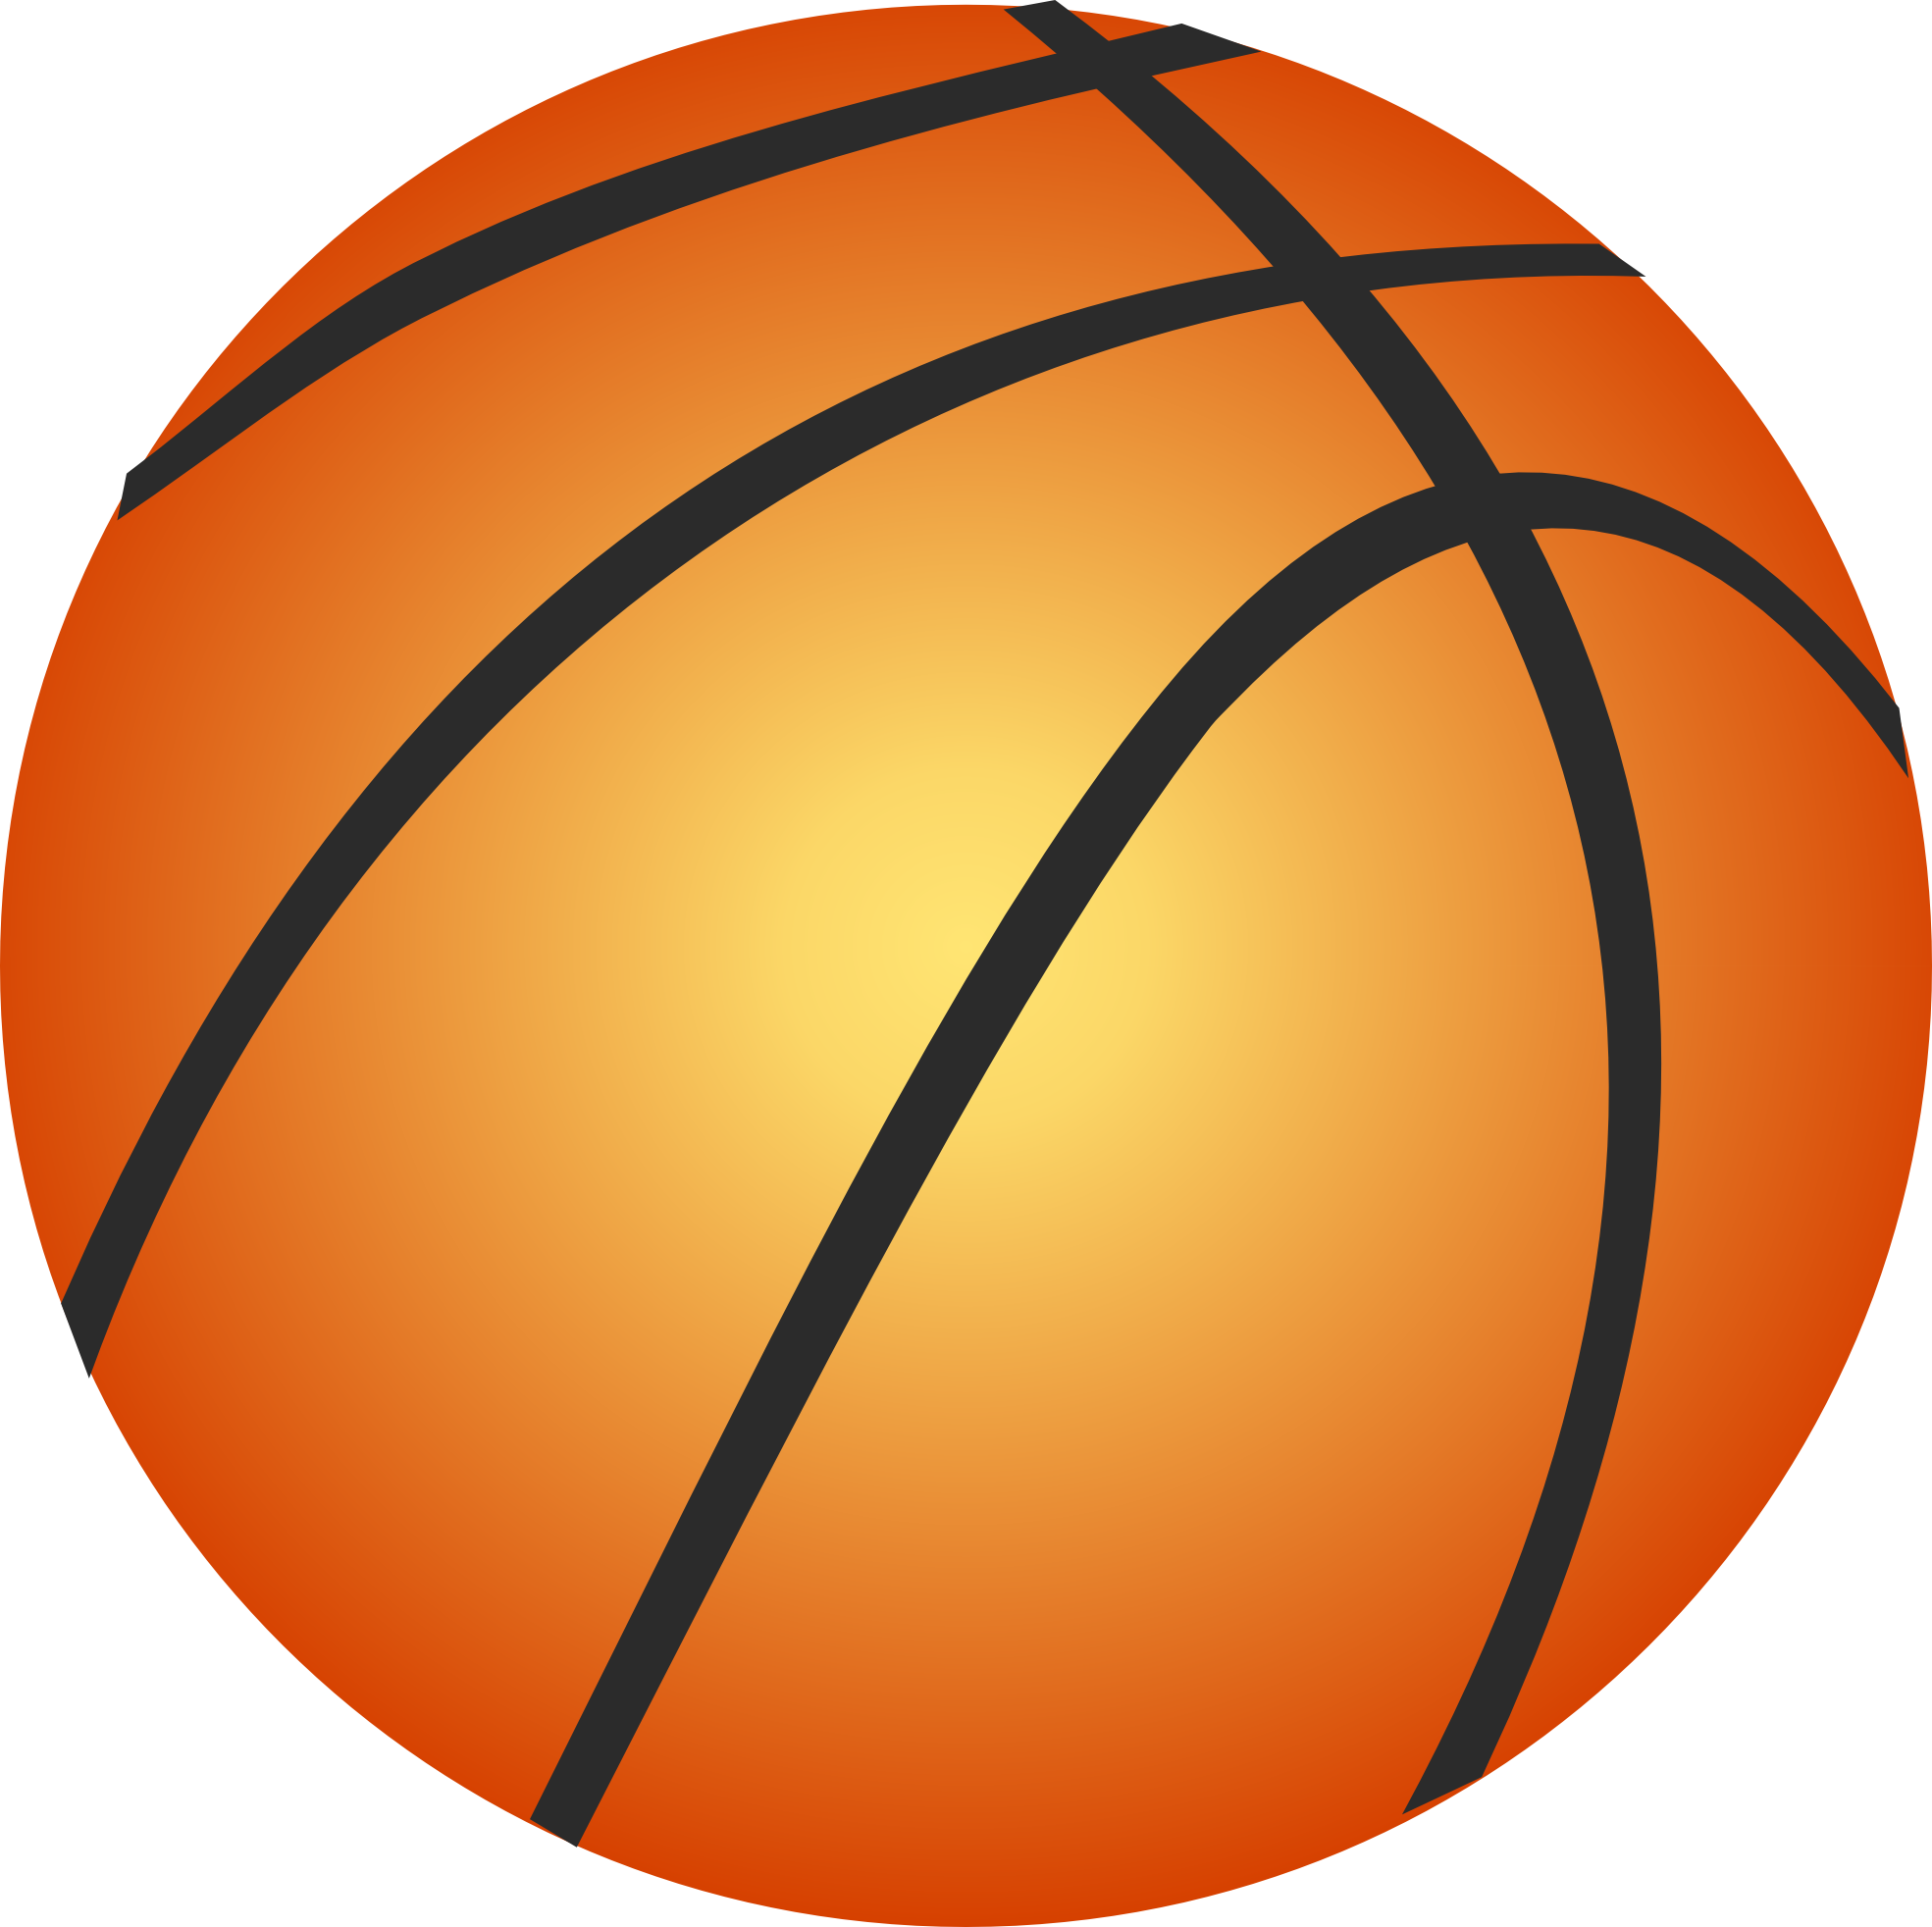 Here is some basketball clipa